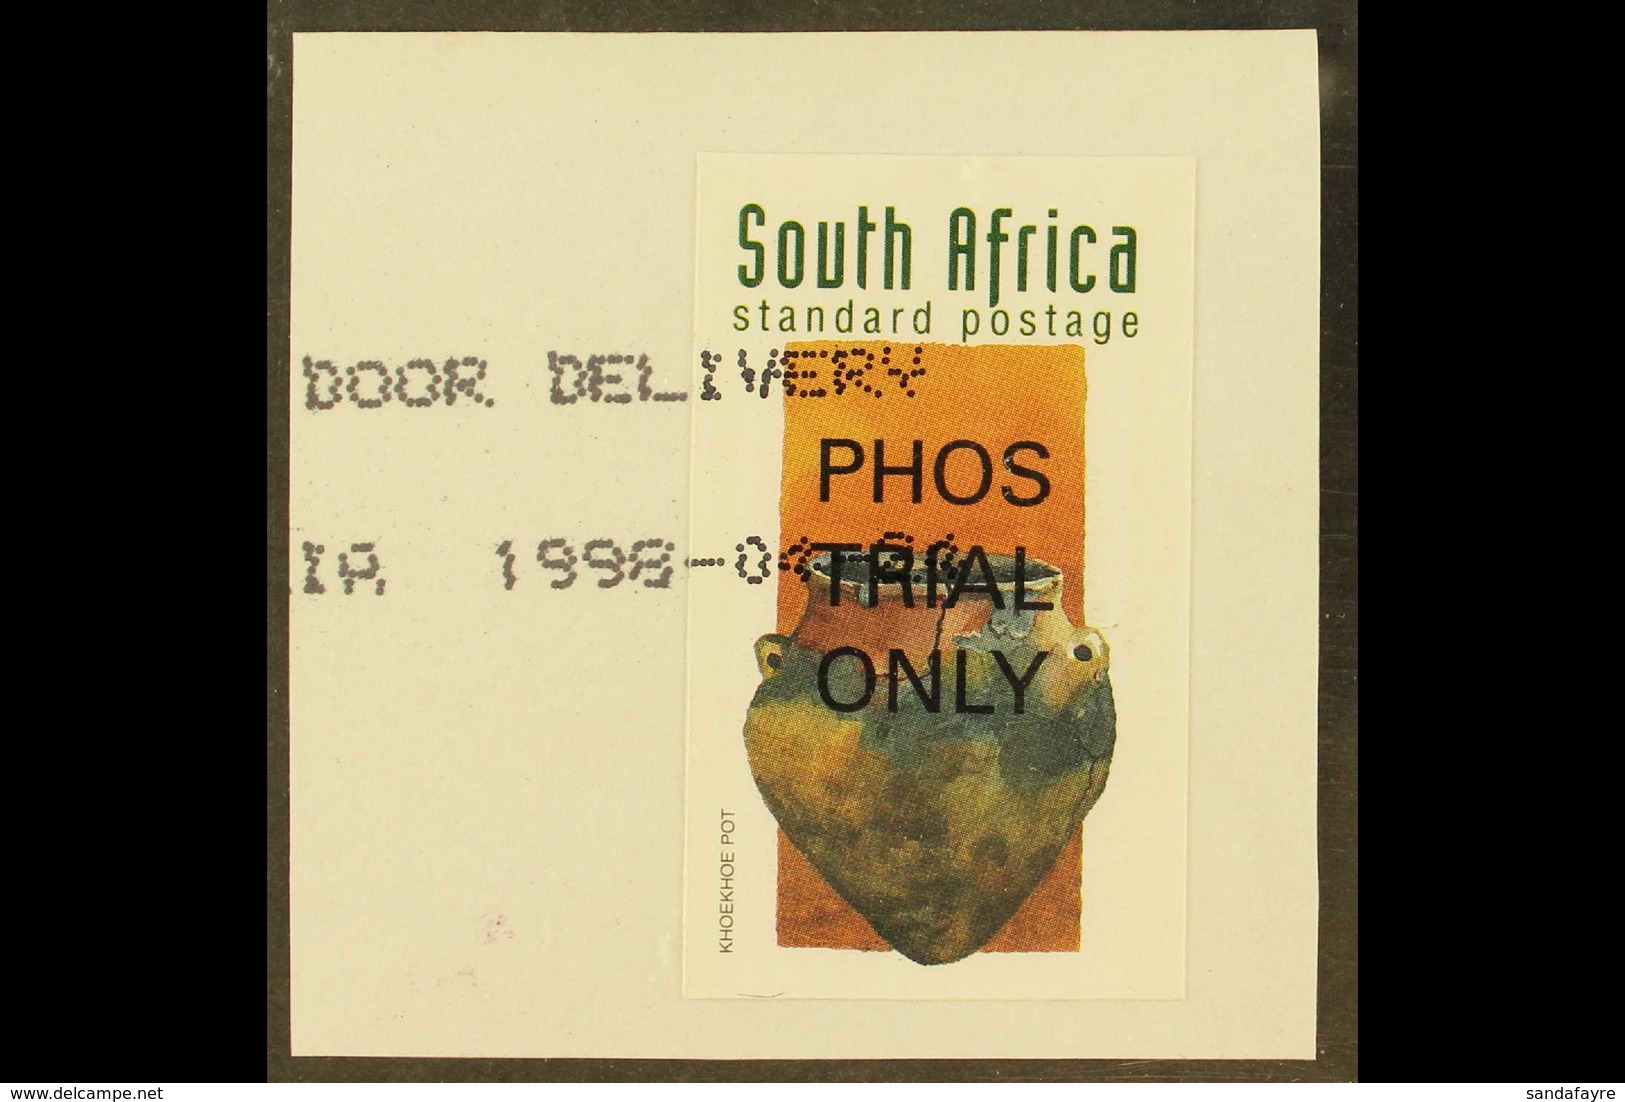 1998 Early South African History, Standard Postage (1r.10) Khoekhoe Pot, IMPERFORATE Single Overprinted "PHOS TRIAL ONLY - Unclassified